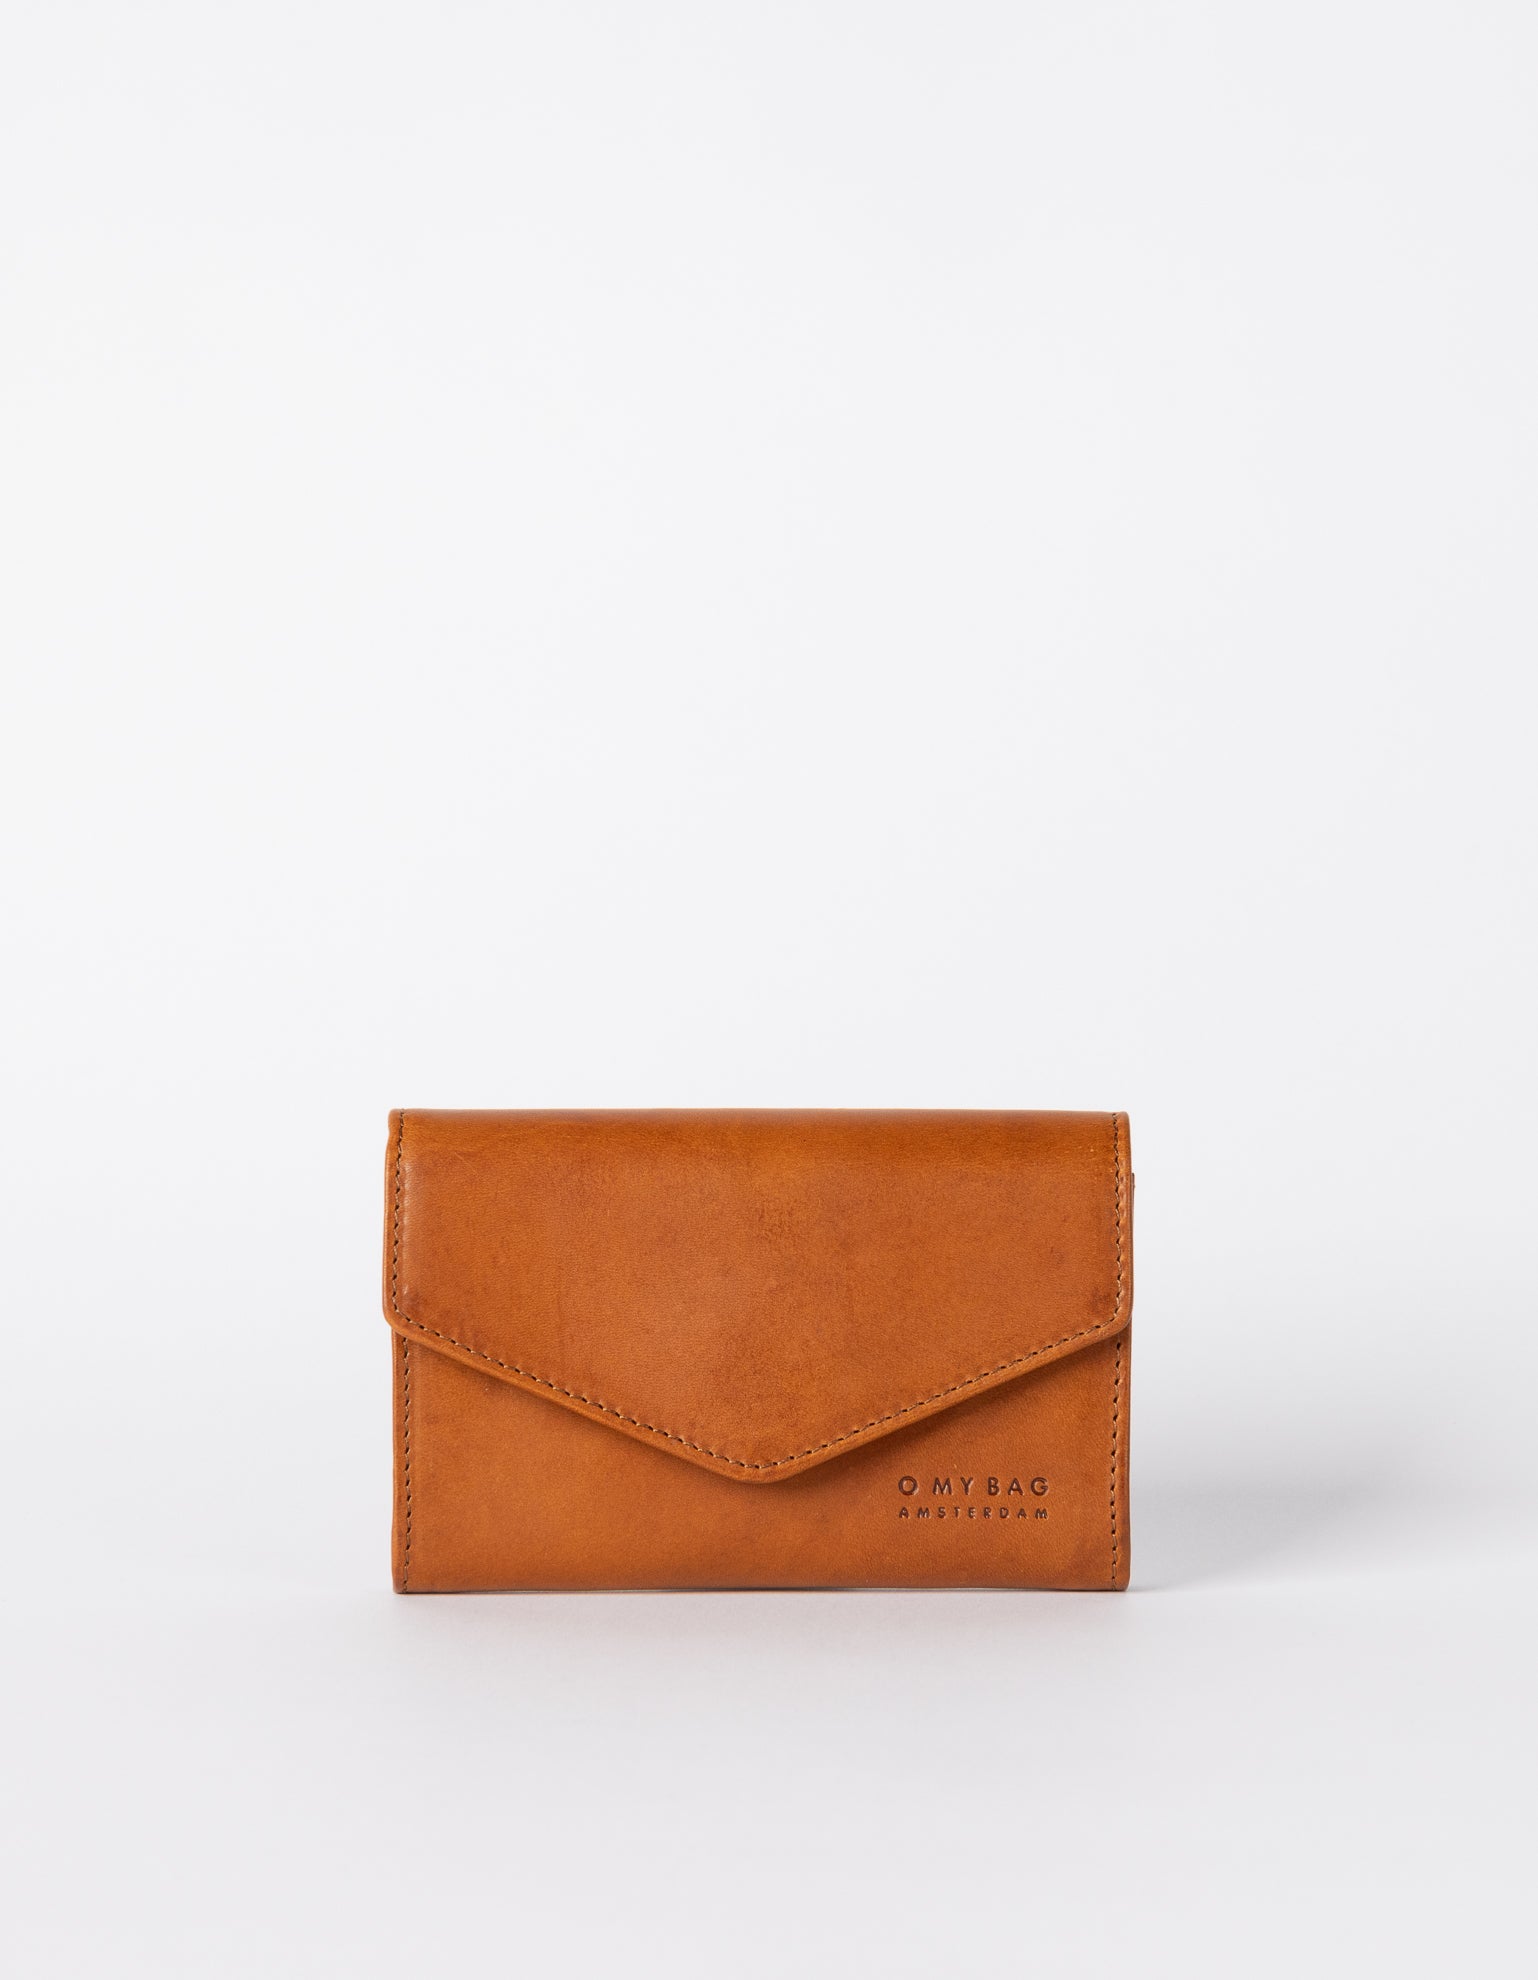 Cognac classic leather purse - front product image